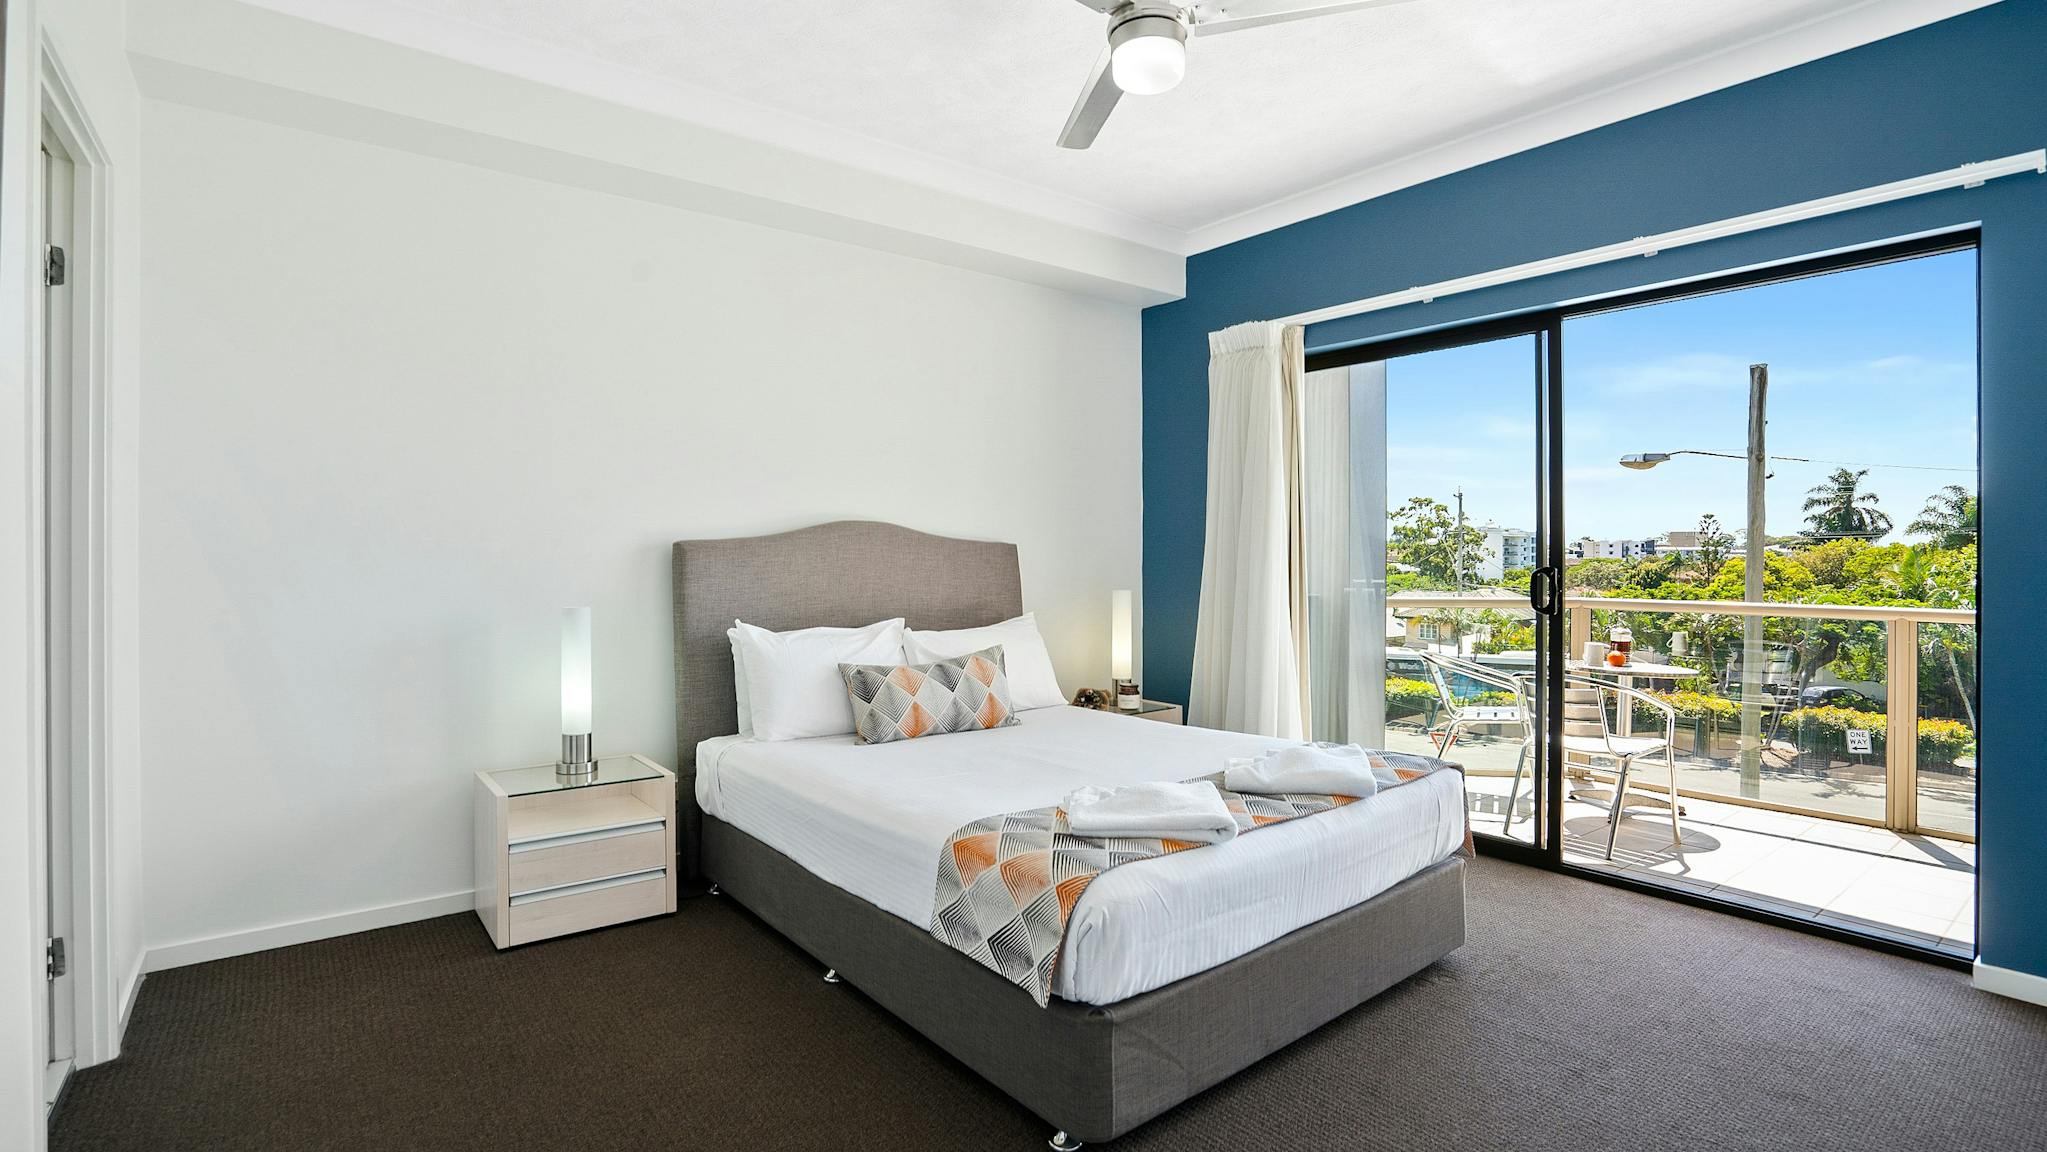 Master Bedrooms are really spacious and have a ceiling fan and ensuite